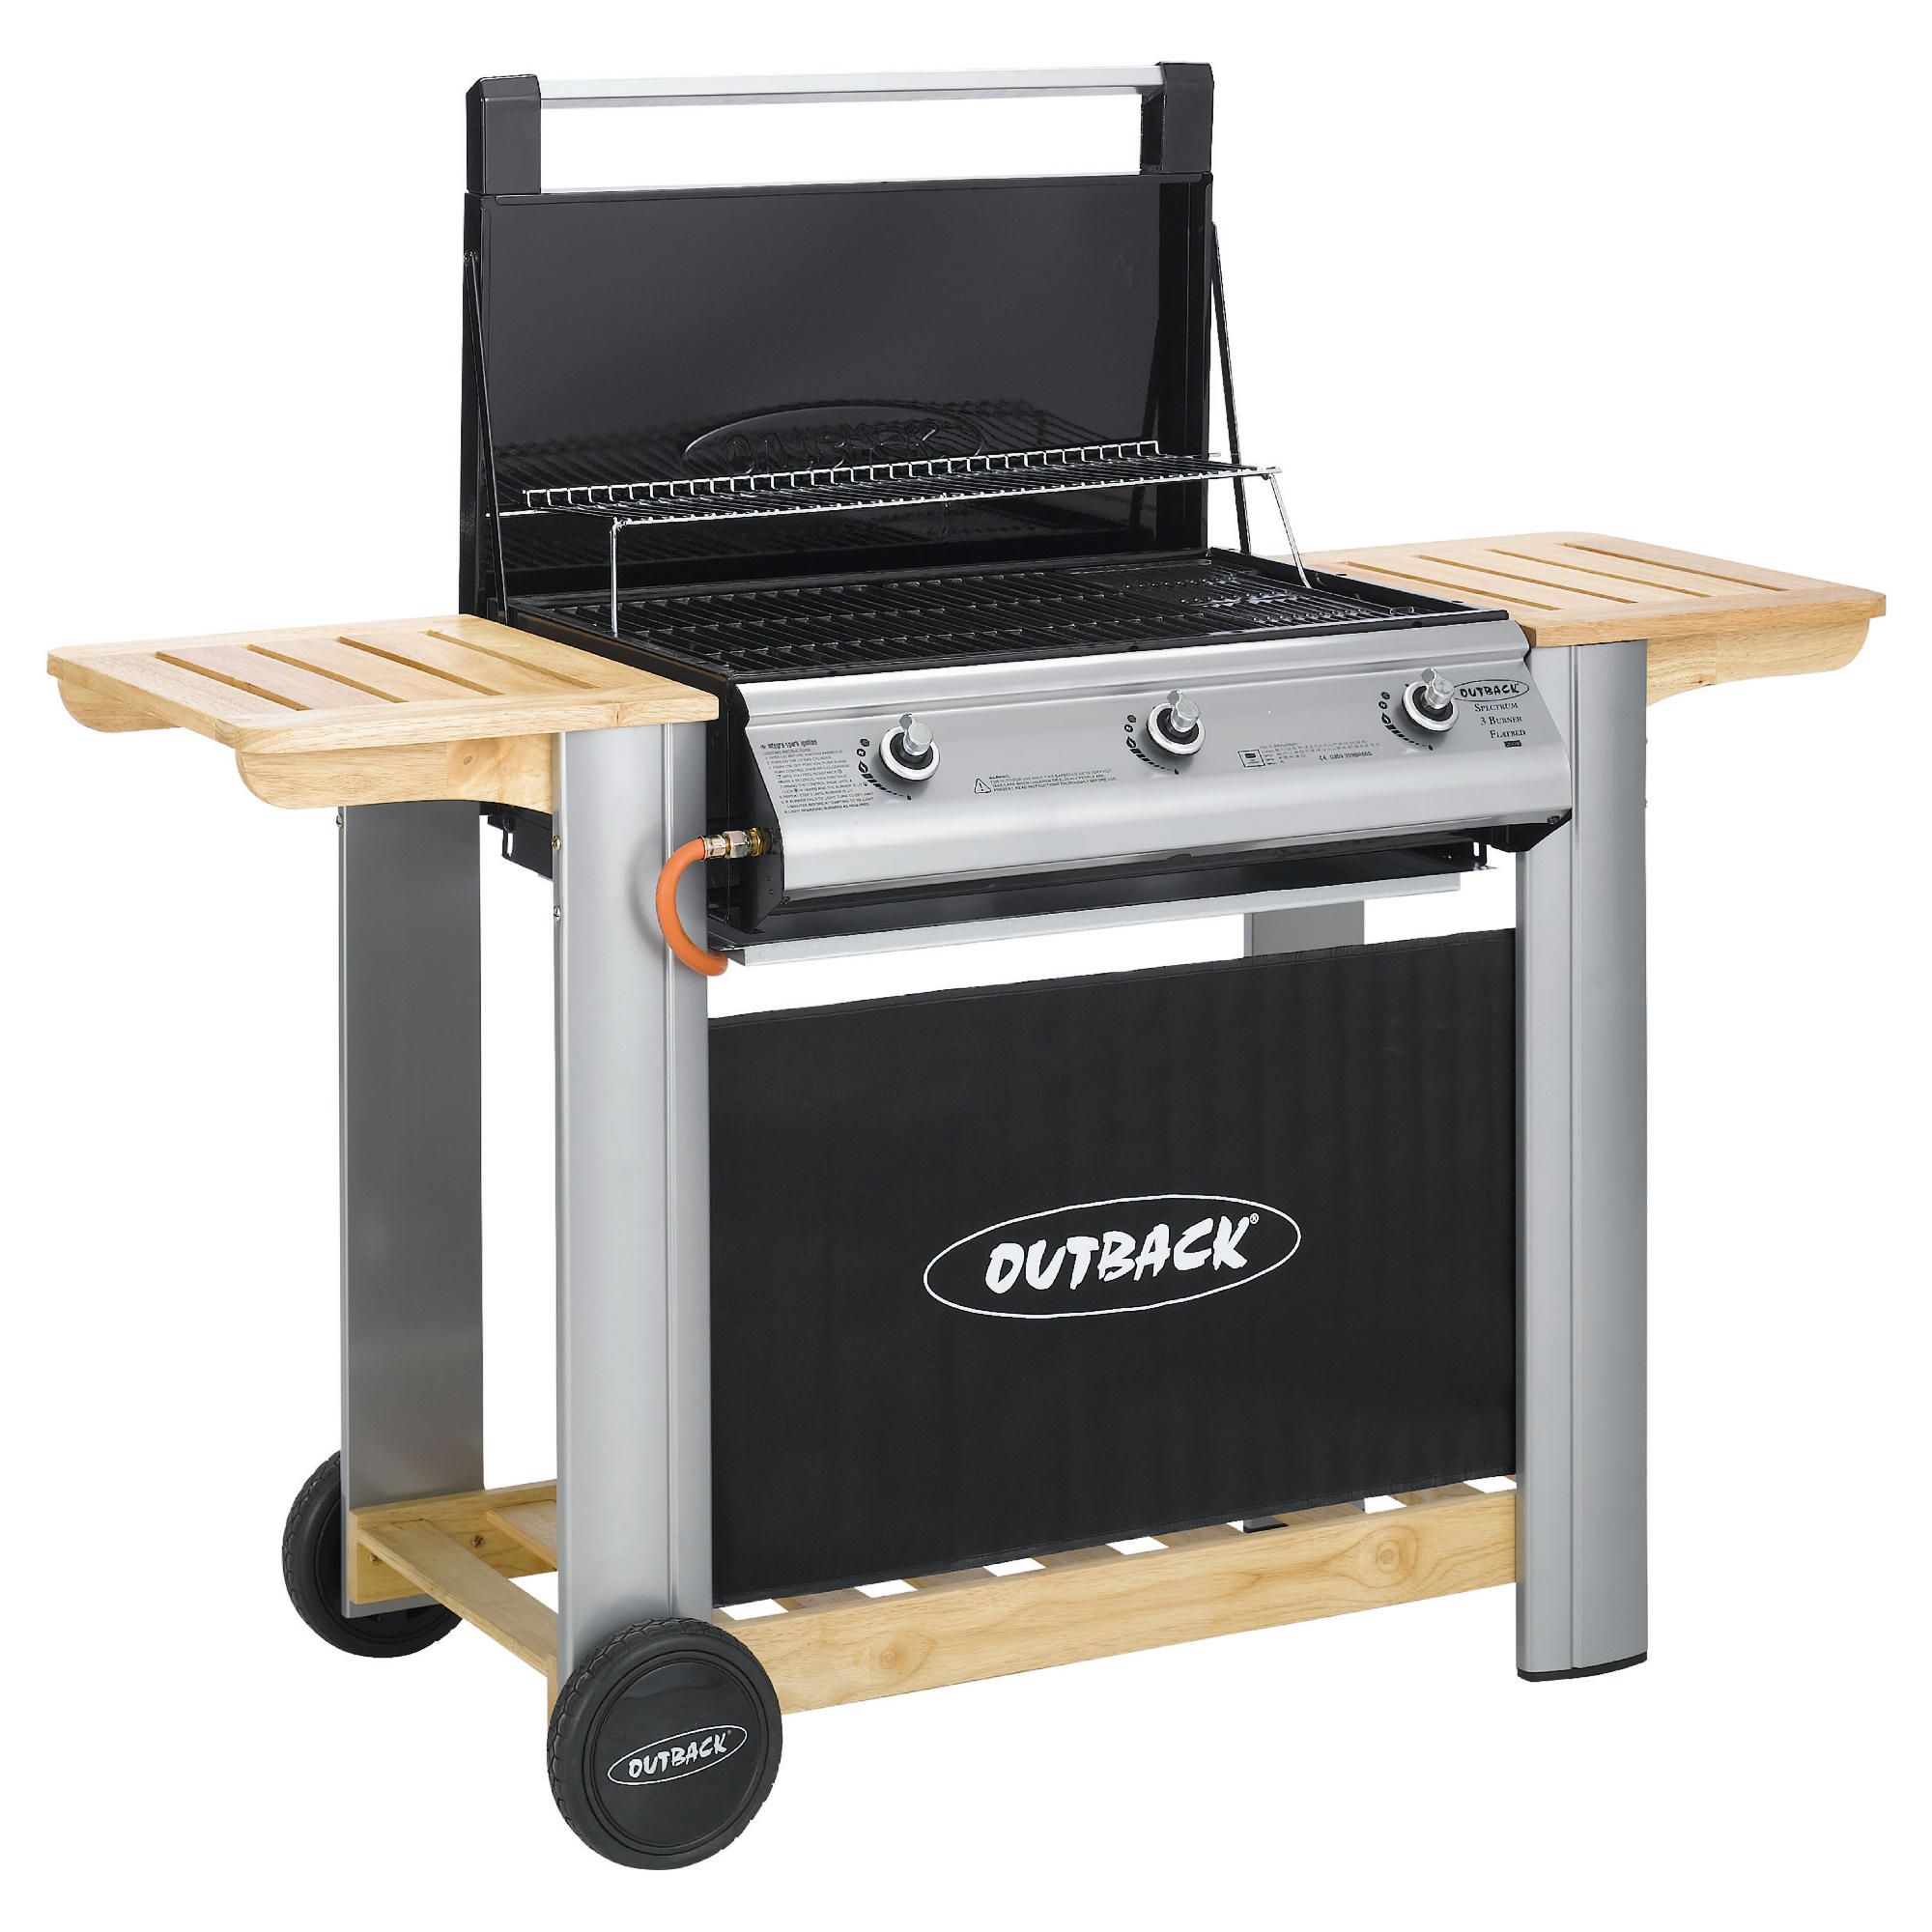 Outback Spectrum 3 Burner Flatbed Gas BBQ with Cover at Tesco Direct